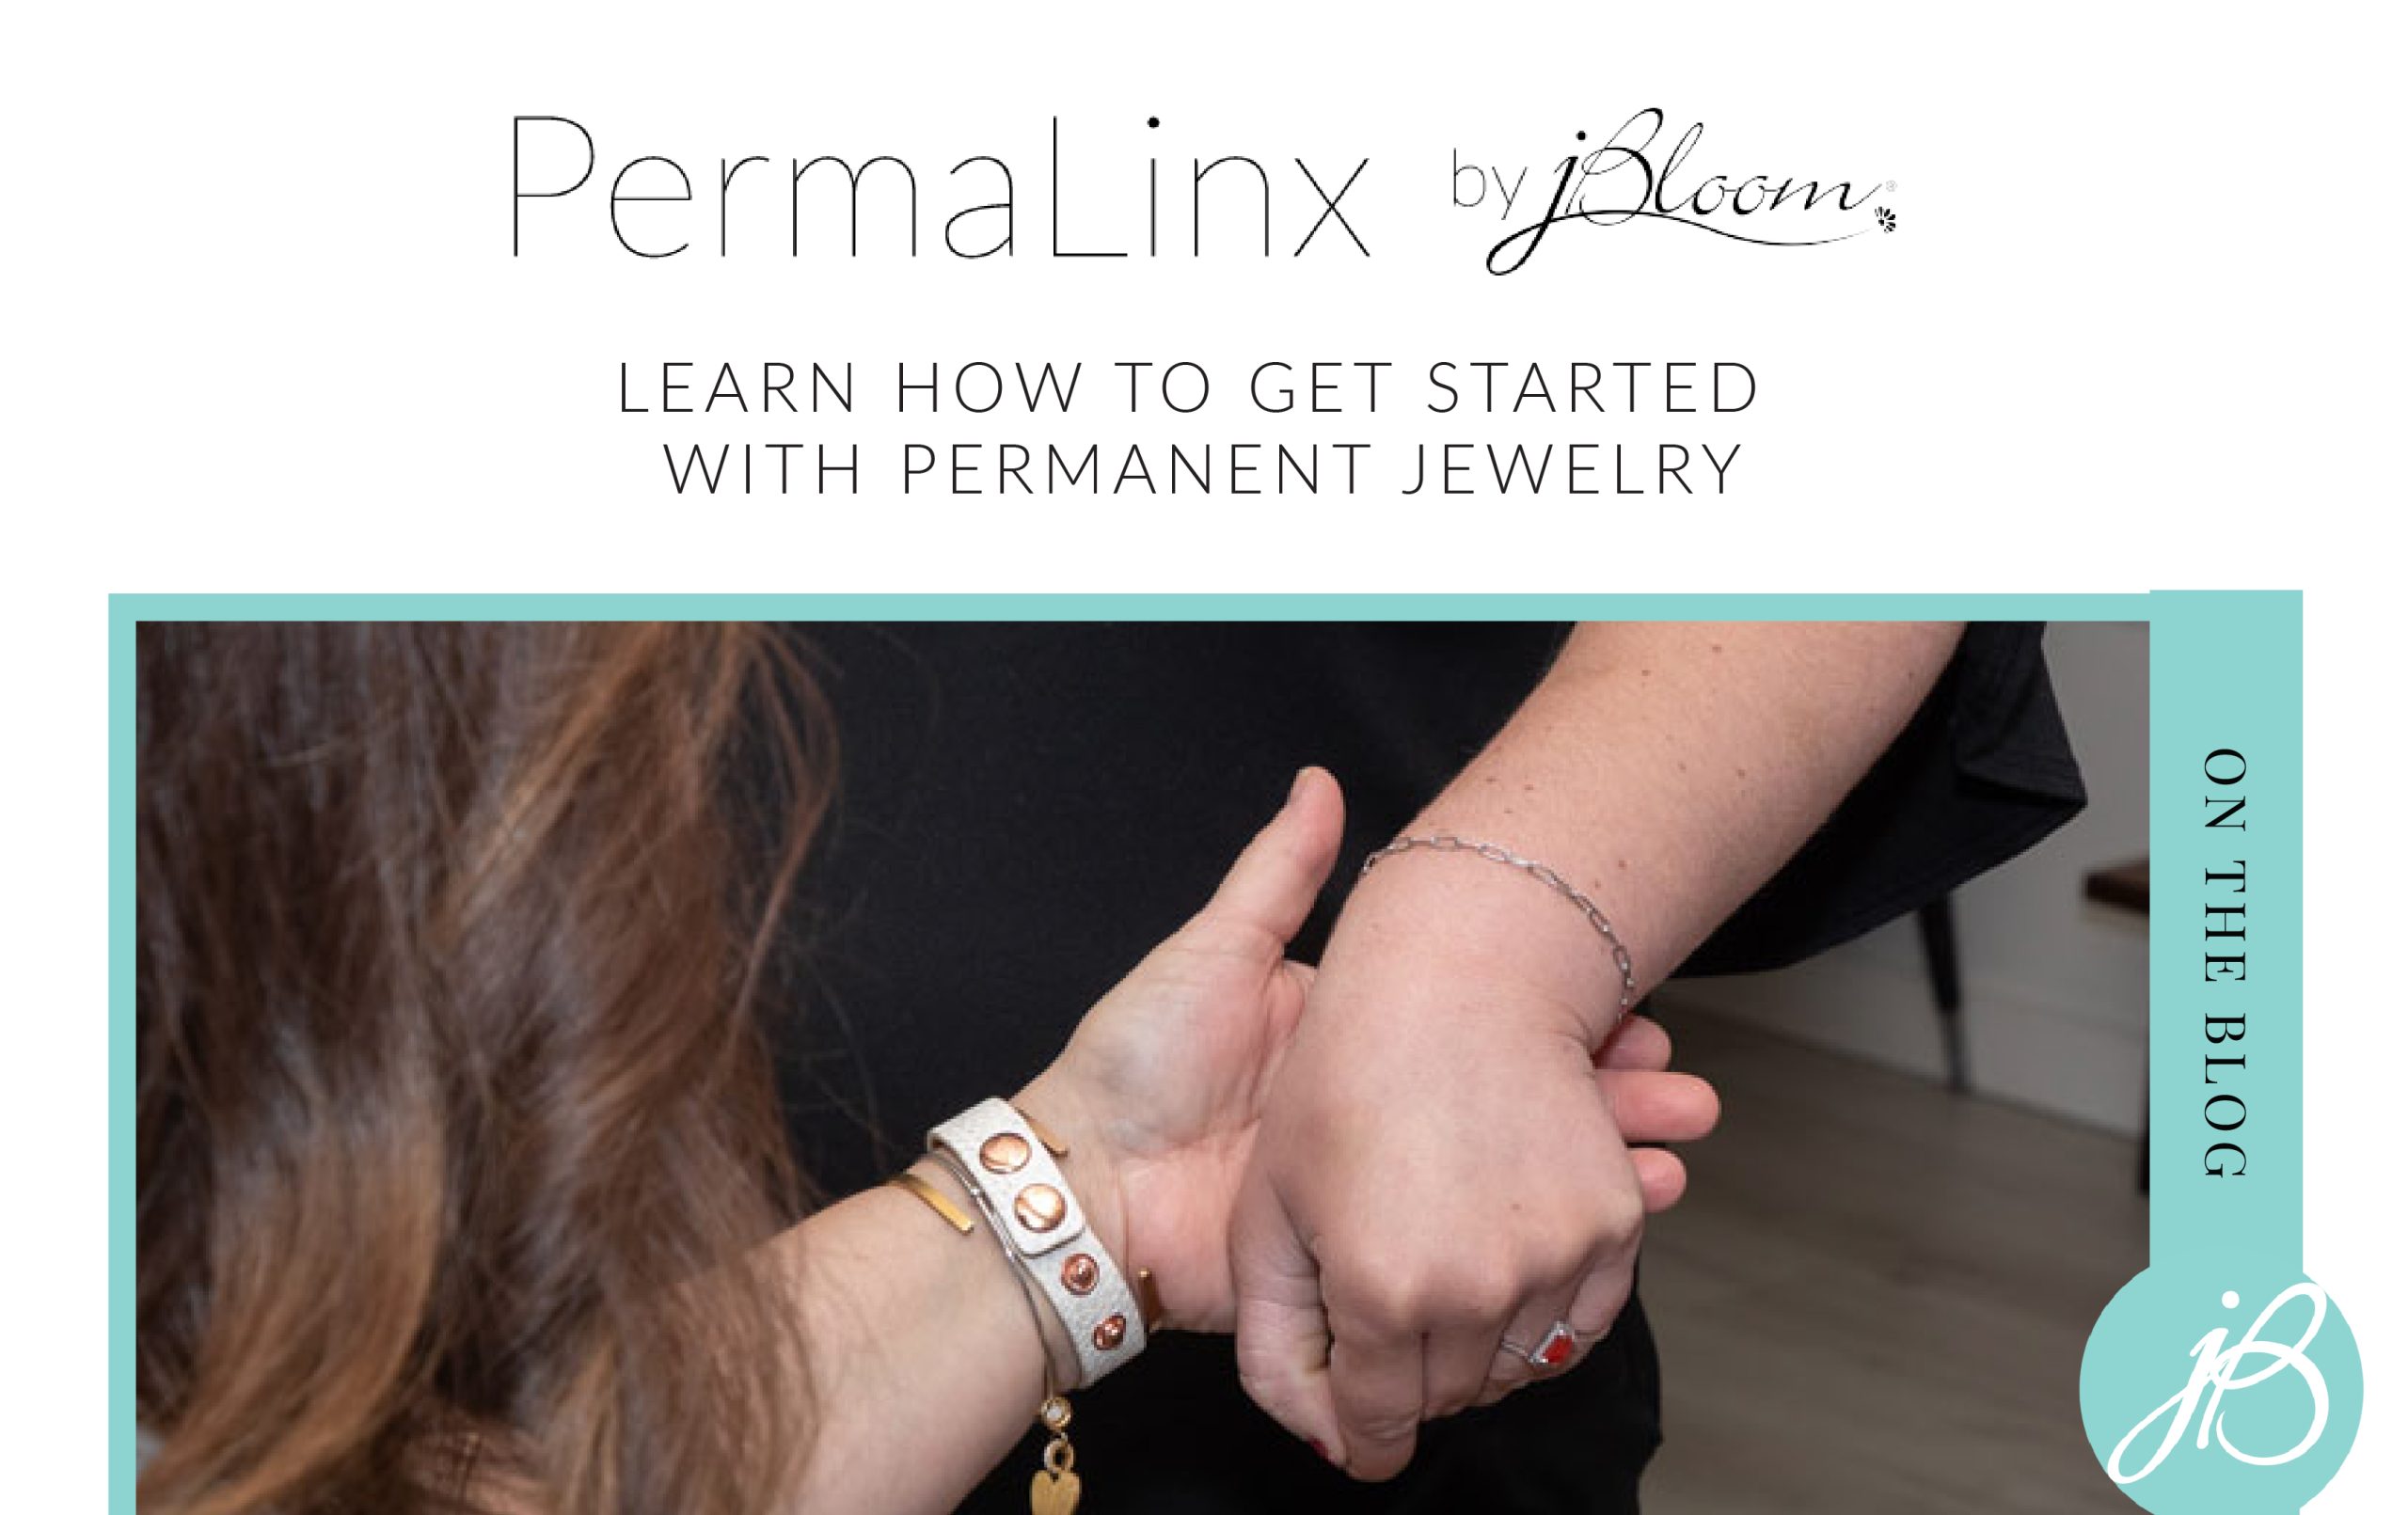 Learn How to Get Started With Permanent Jewelry